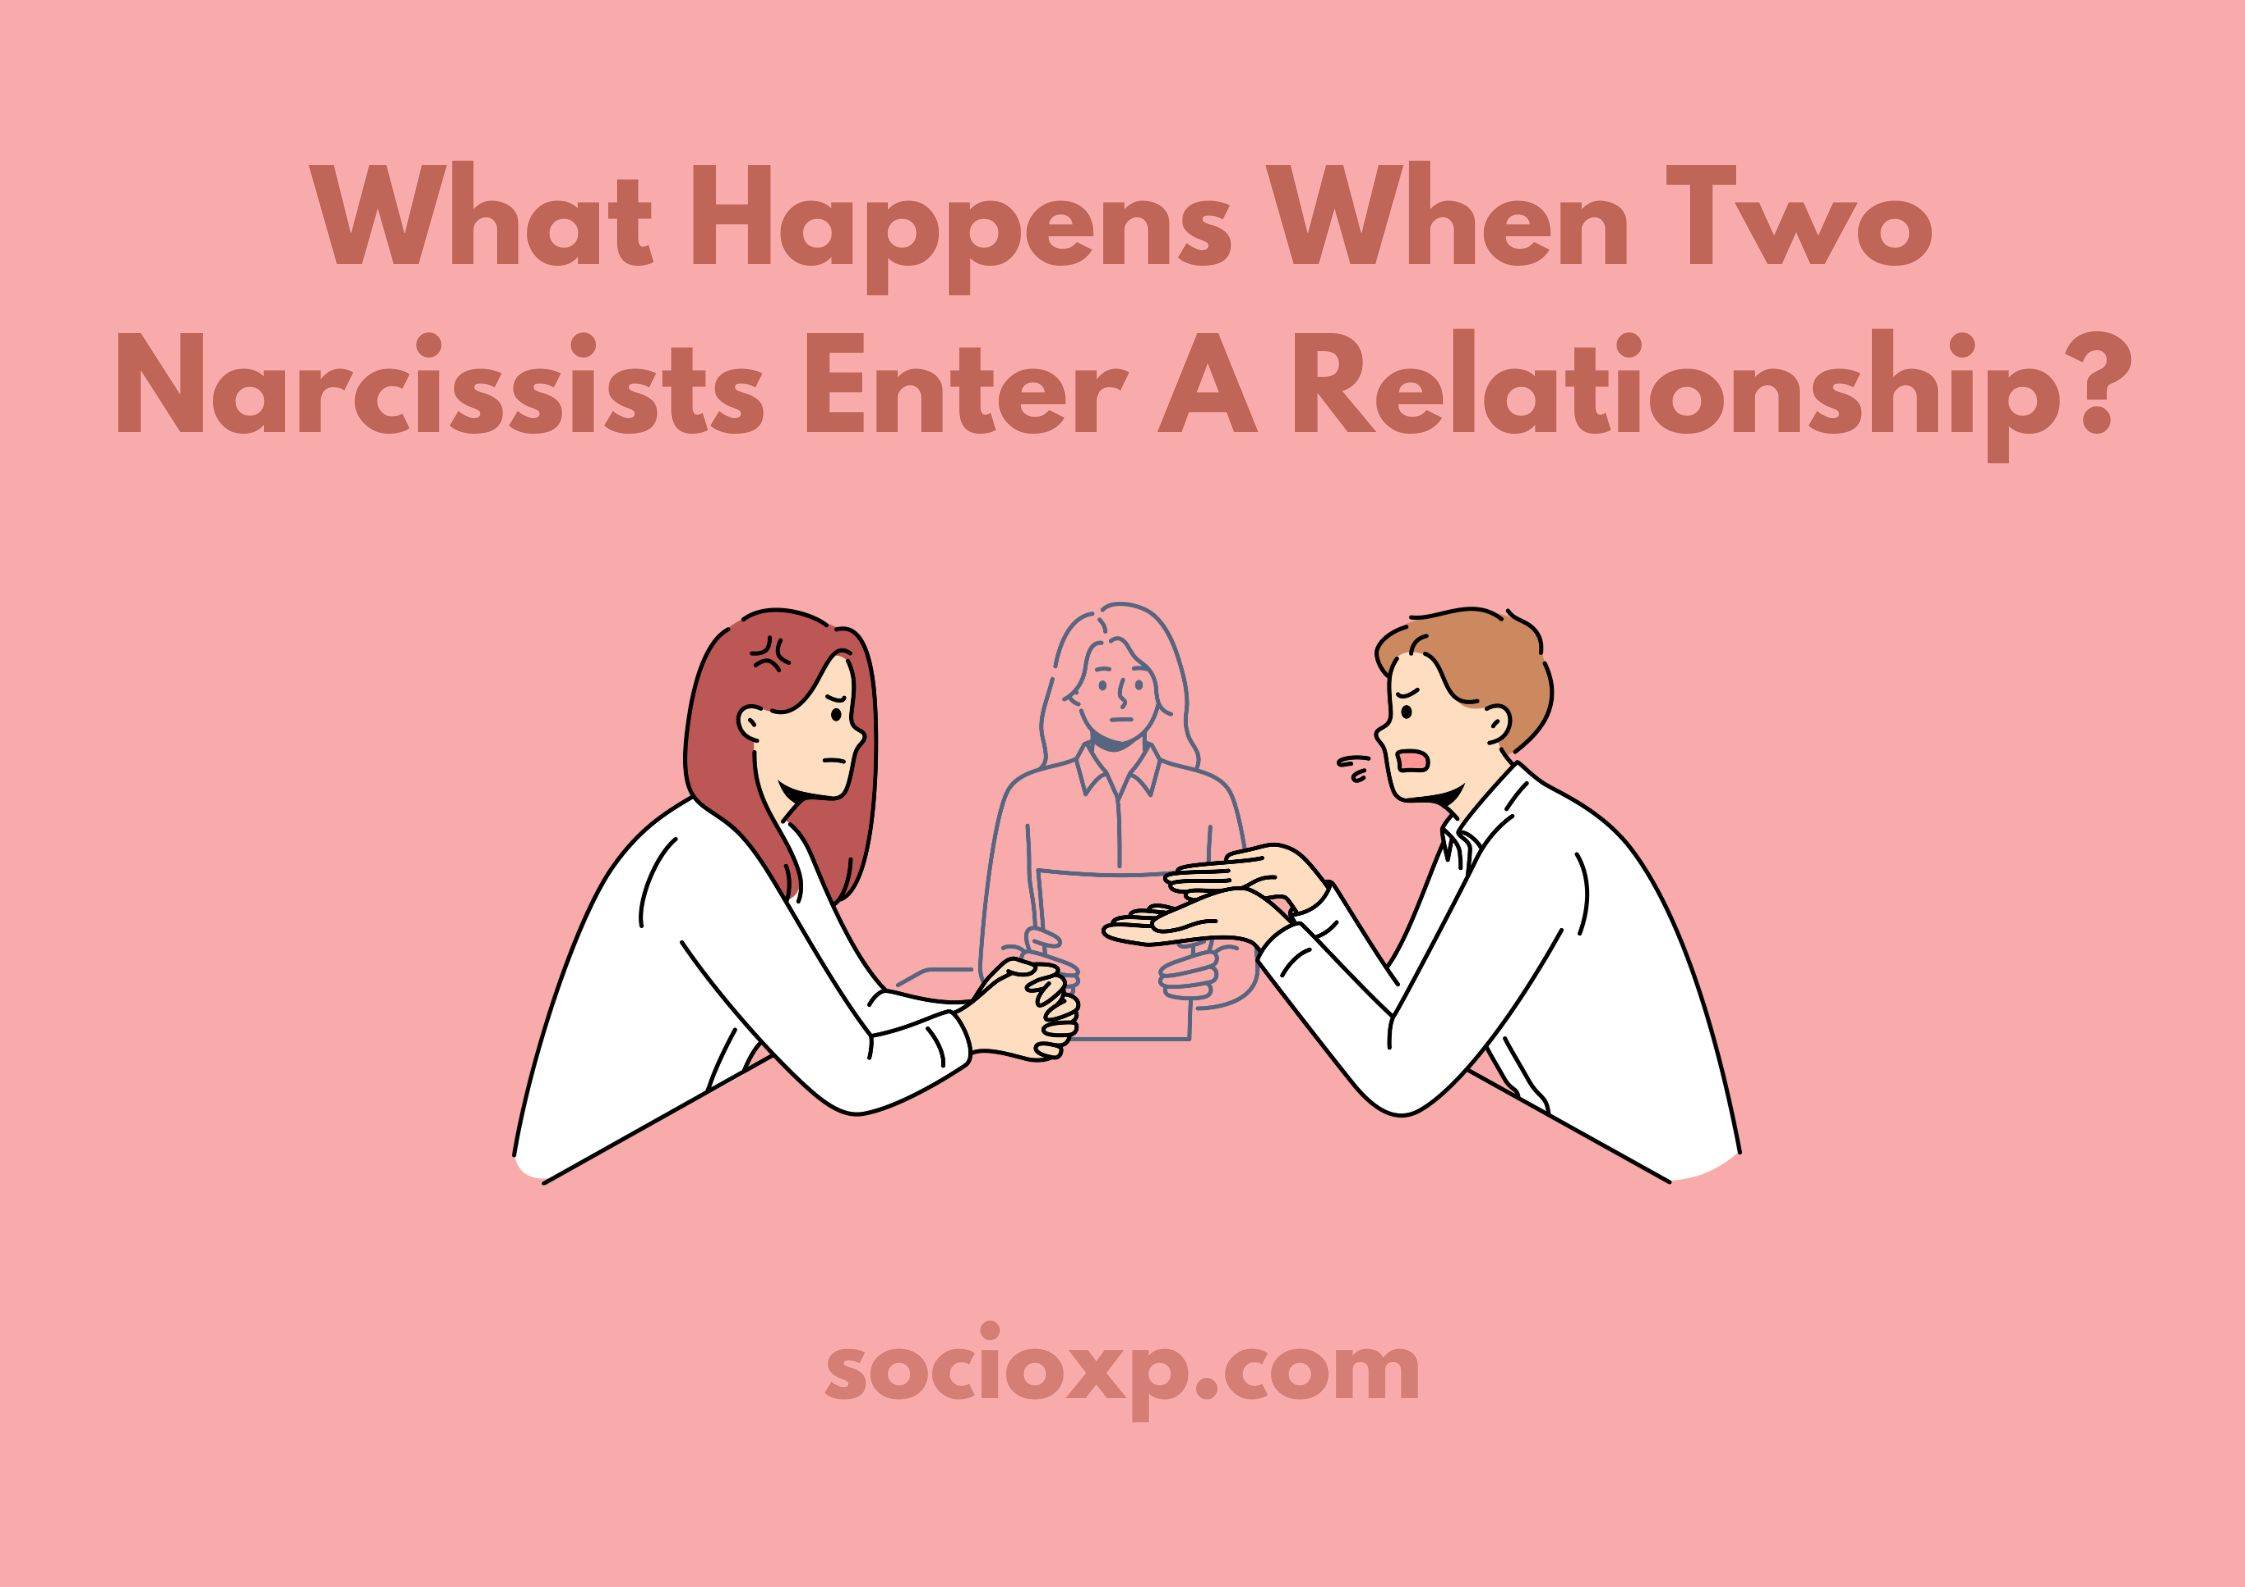 What Happens When Two Narcissists Enter A Relationship?